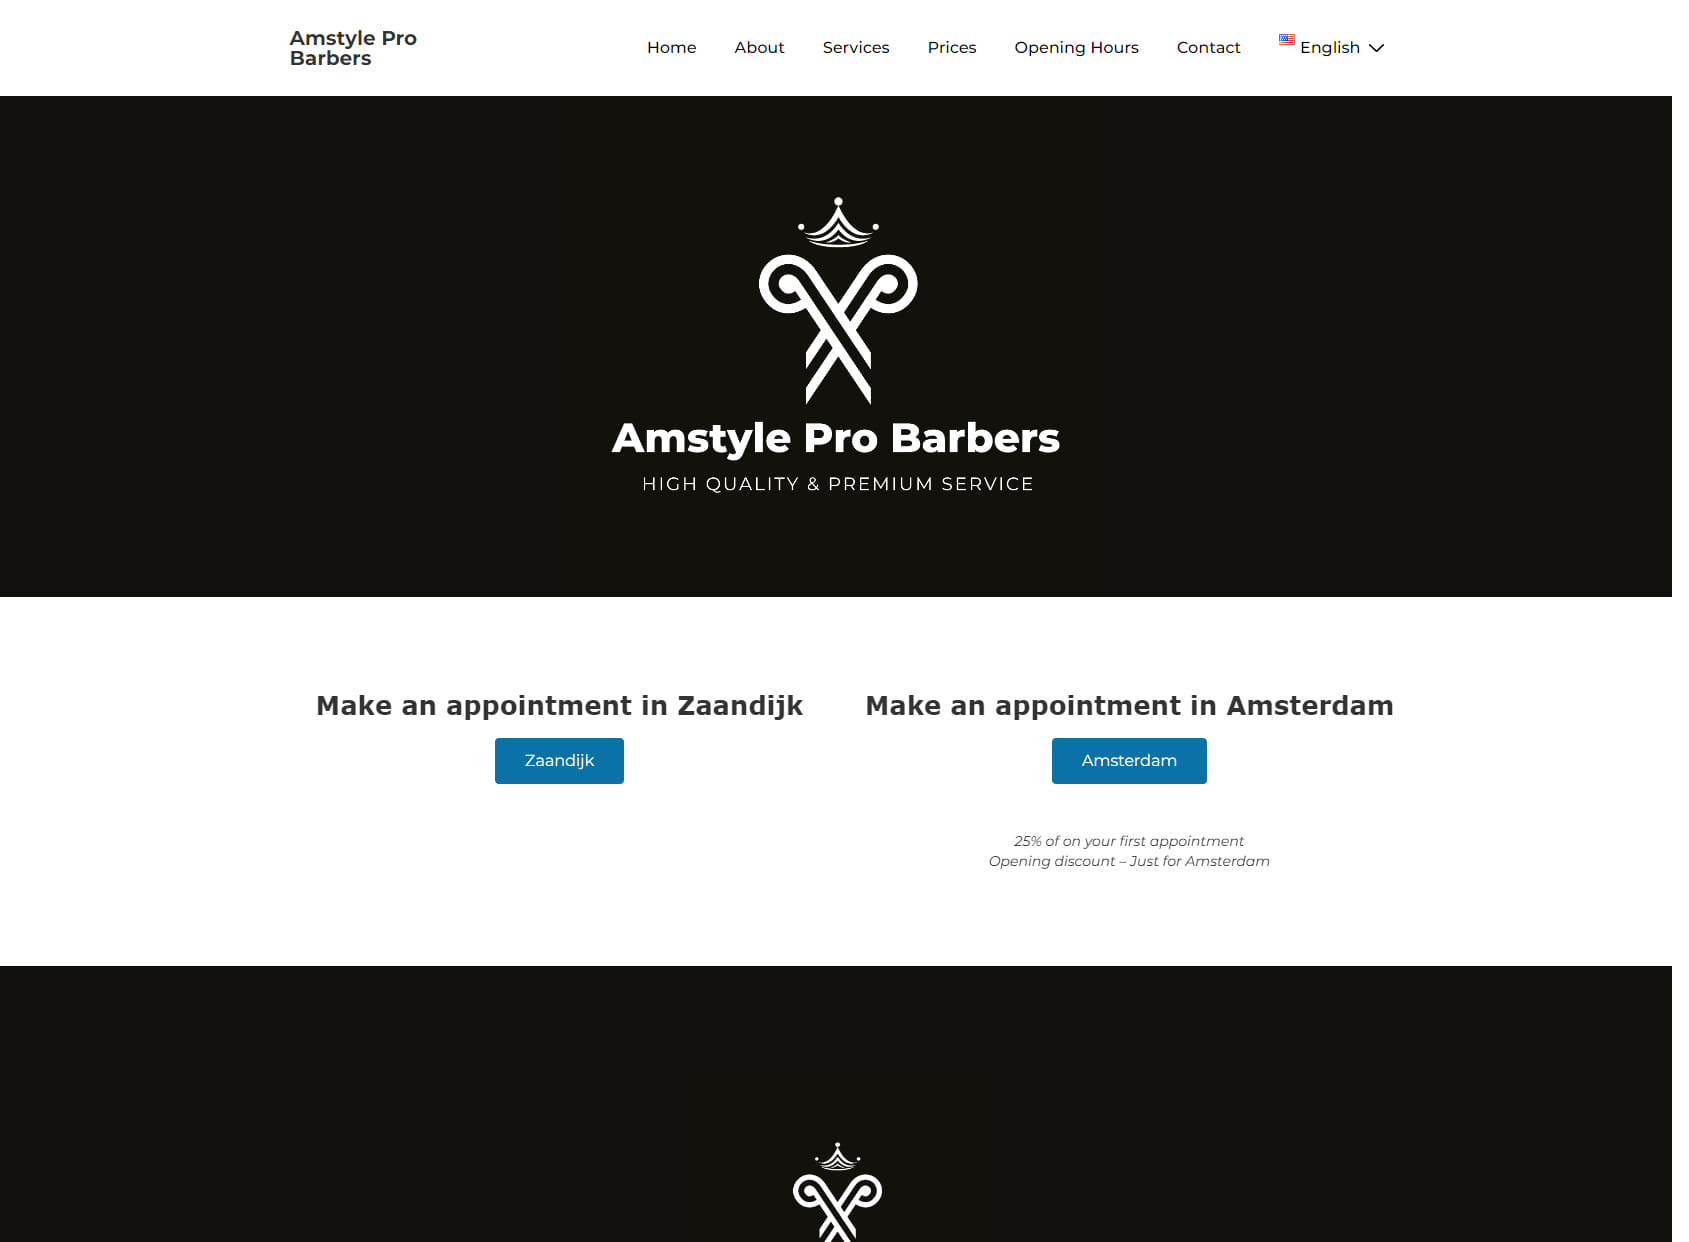 Amstyle pro barbers